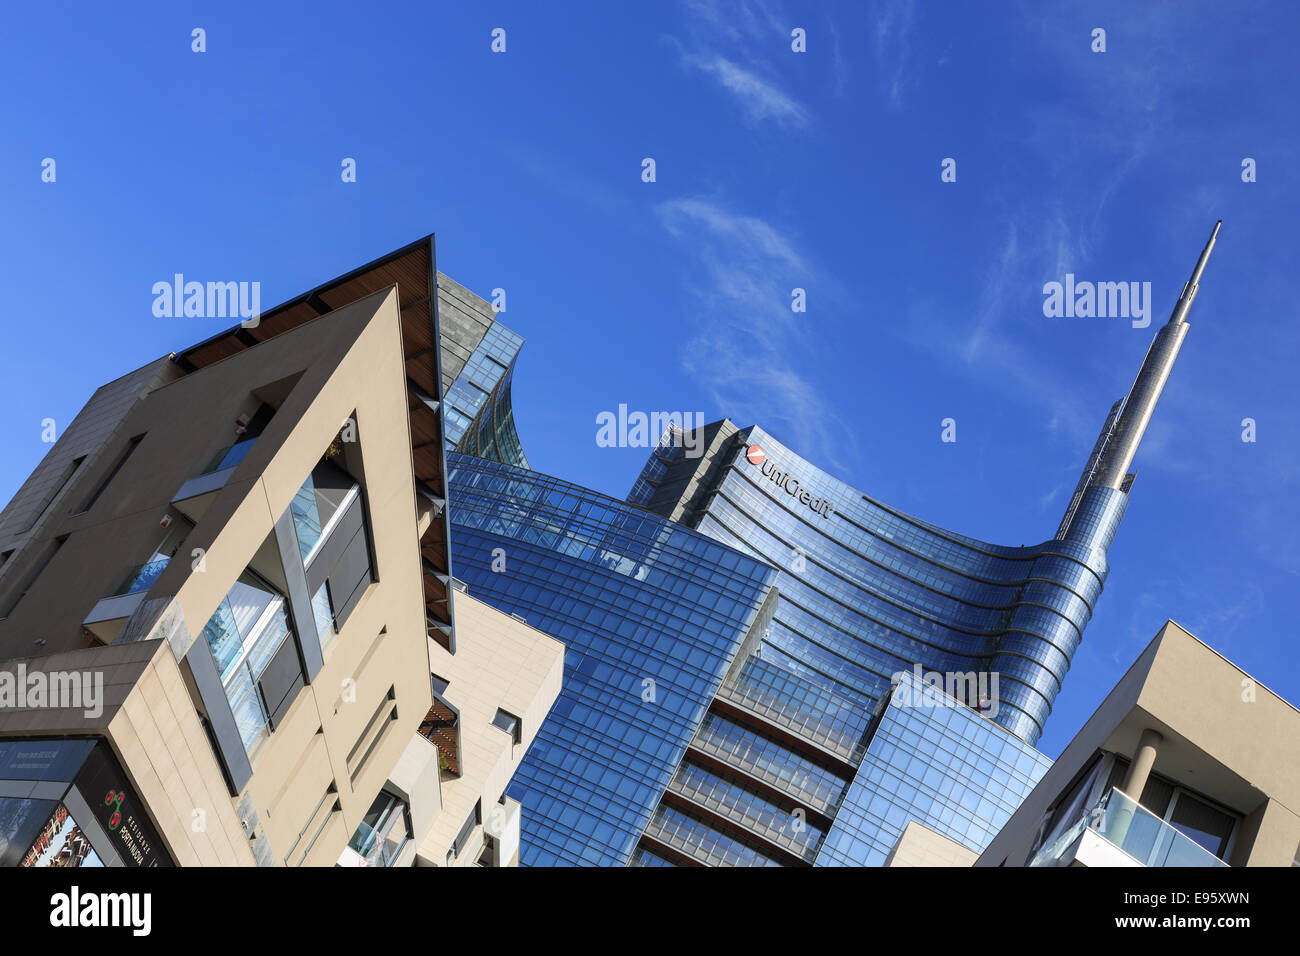 Milan, Porta Nuova residential district and Unicredit tower, Lombardy, Italy Stock Photo